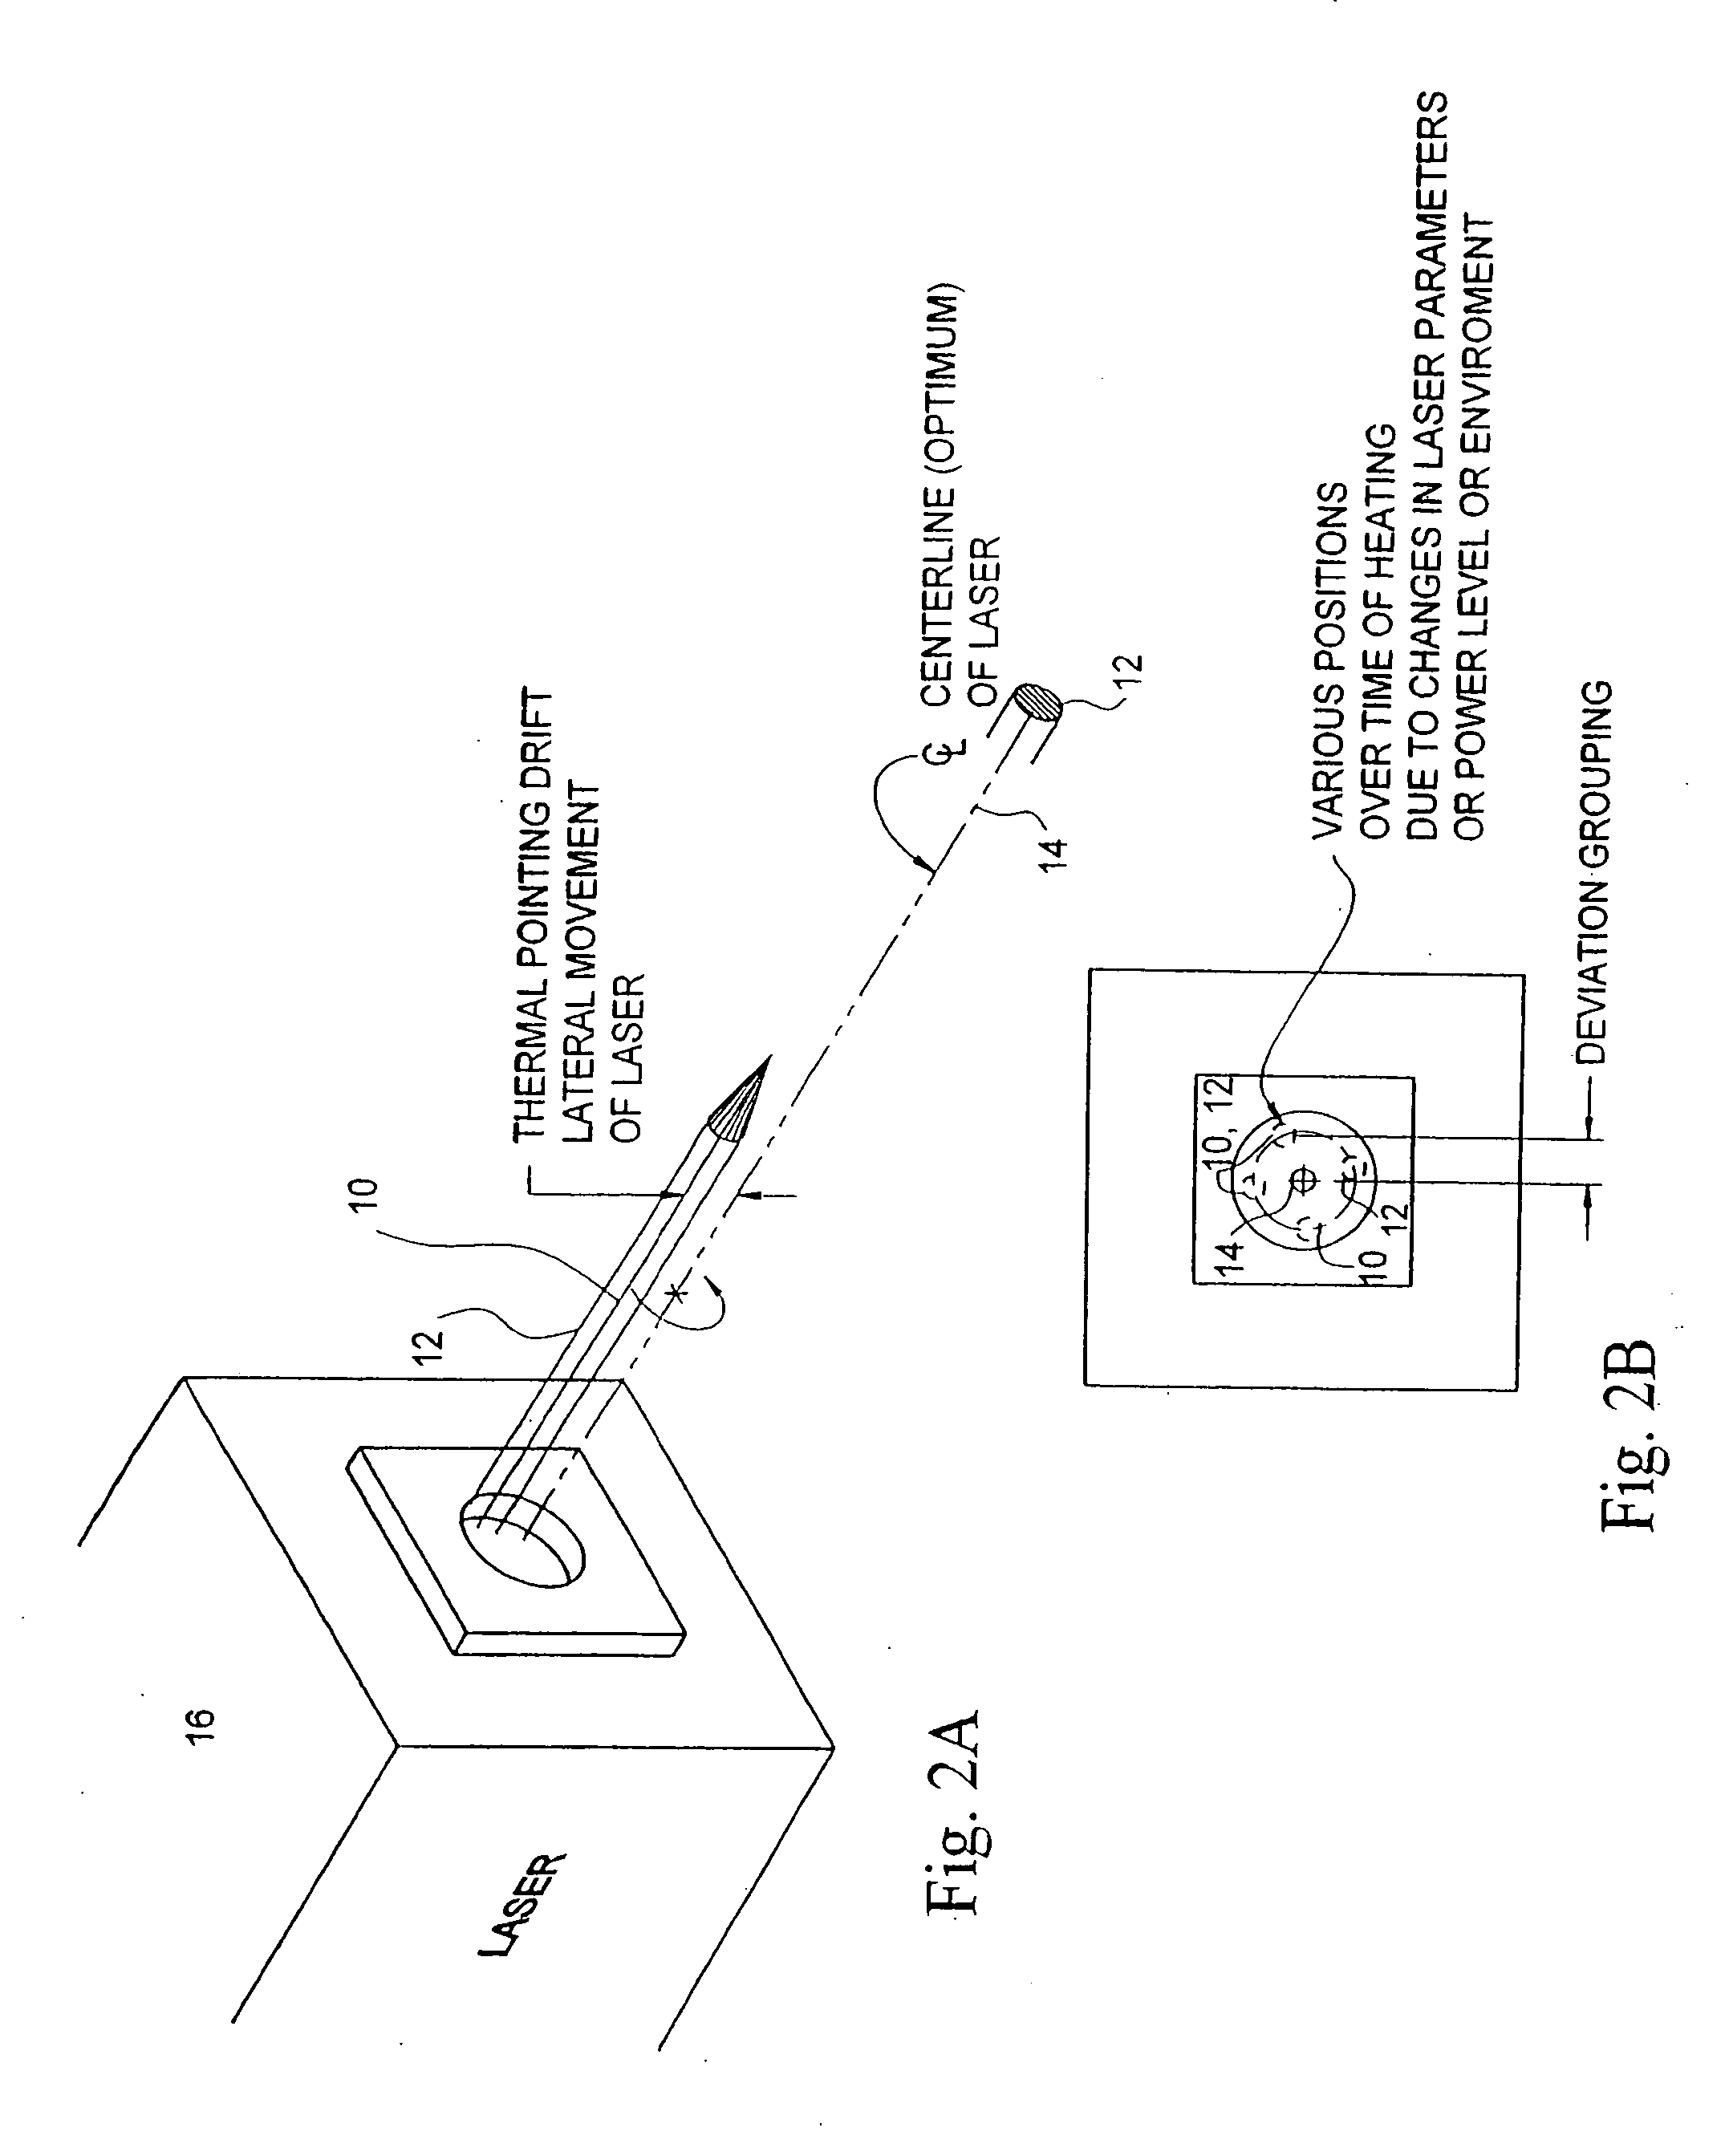 Beam shaping prior to harmonic generation for increased stability of laser beam shaping post harmonic gereration with integrated automatic displacement and thermal beam drift compensation